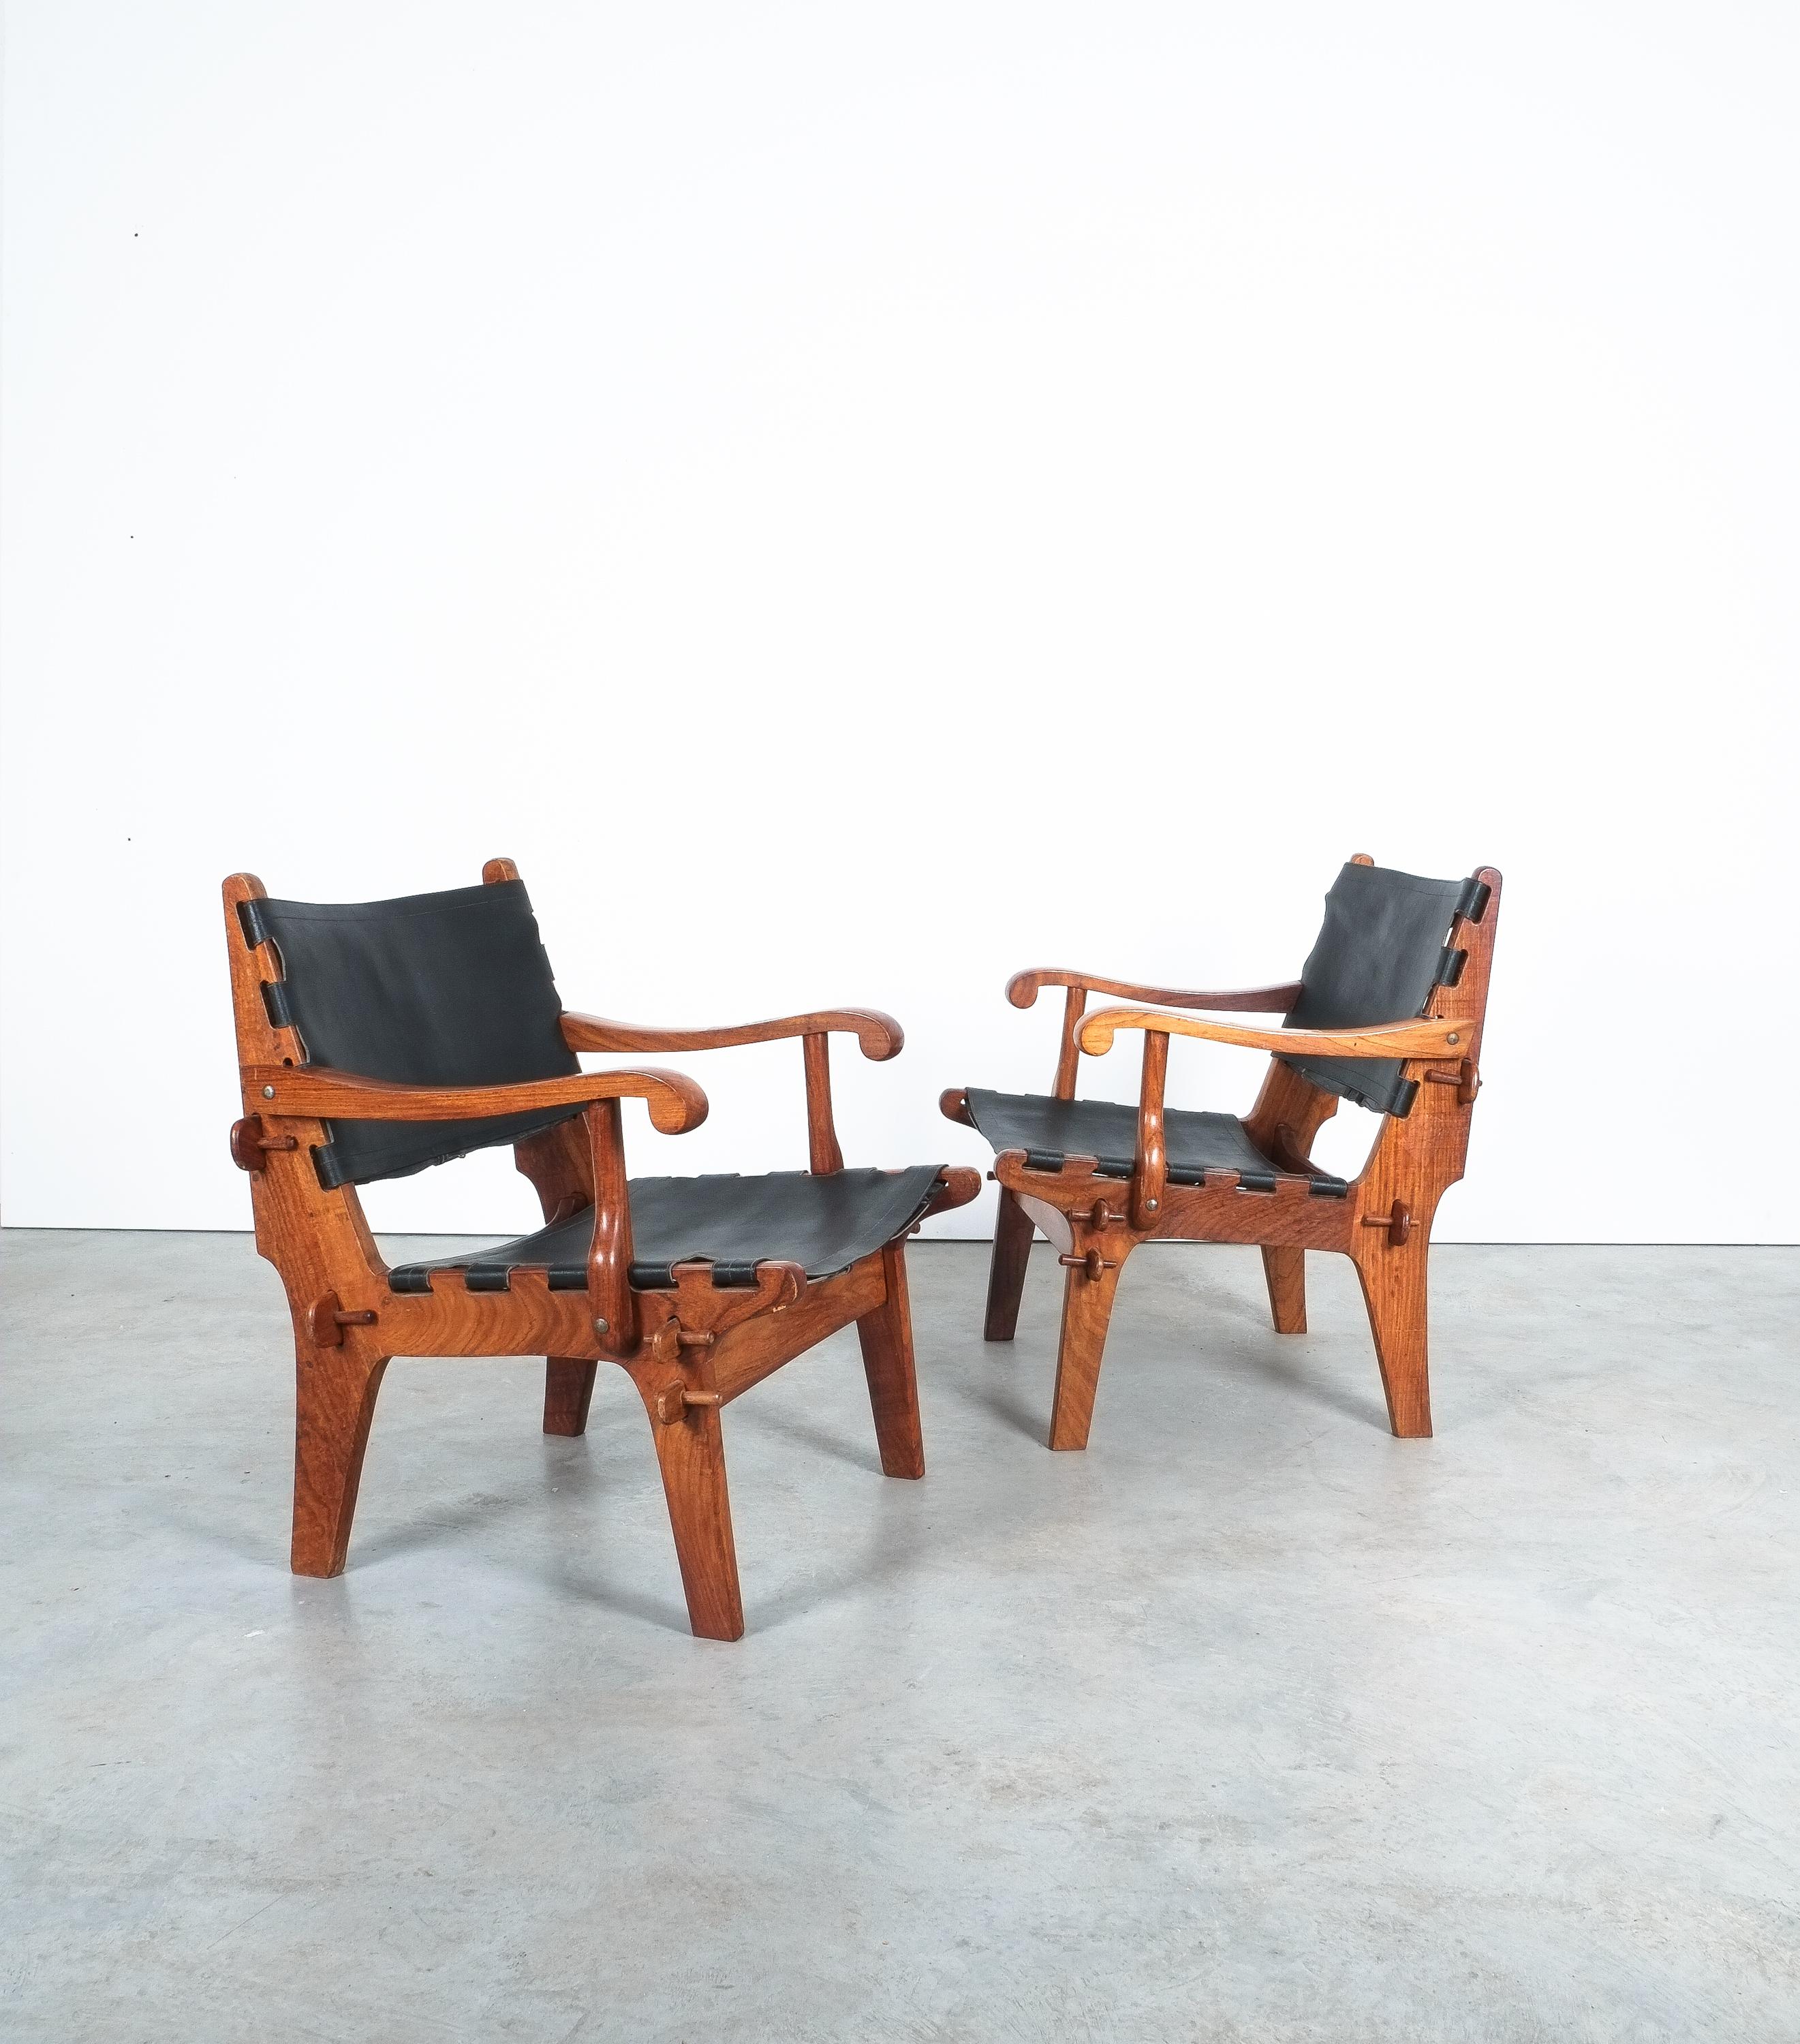 Pair of lounge armchairs designed in 1960s by Angel I. Pazmino and manufactured by Muebles de Estilo in Ecuador.

A stunning and rare pair of vintage safari chairs in solid rosewood and leather. Ecuadorian designer Angel Pazmino has created a